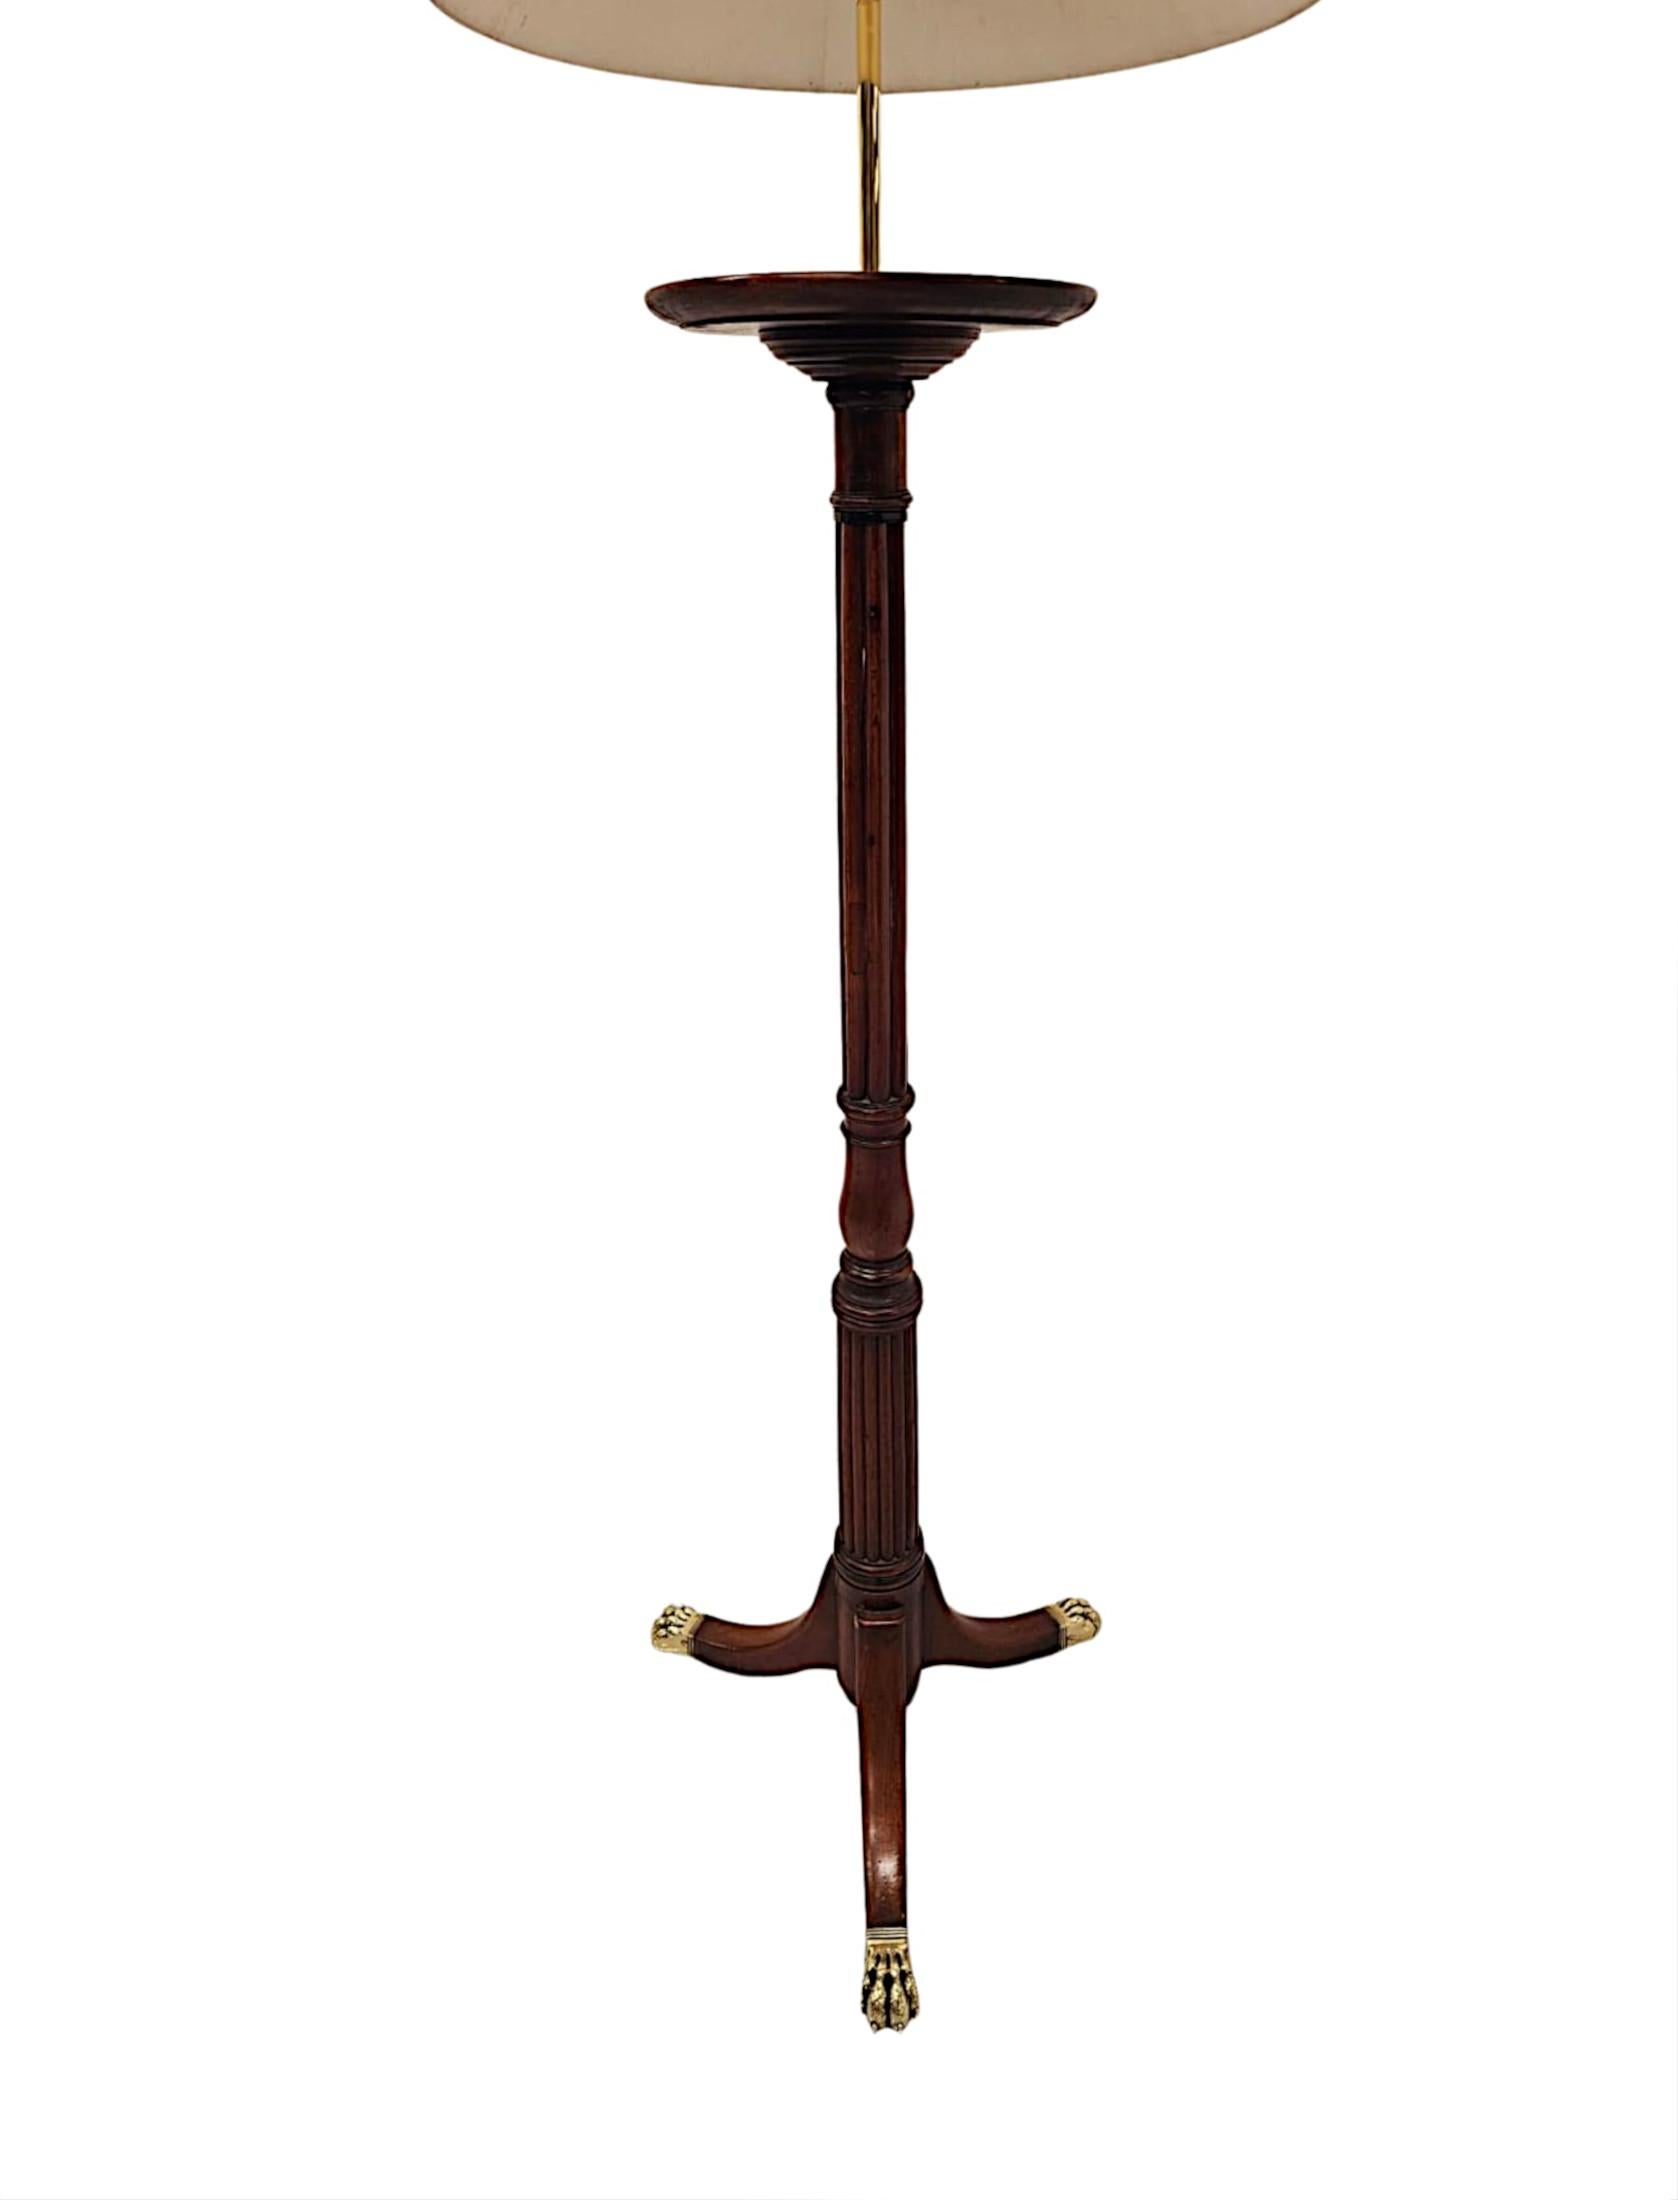 Mahogany A Very Rare Pair of 19th Century Plant Stands / Torcheres Converted to Lamps For Sale